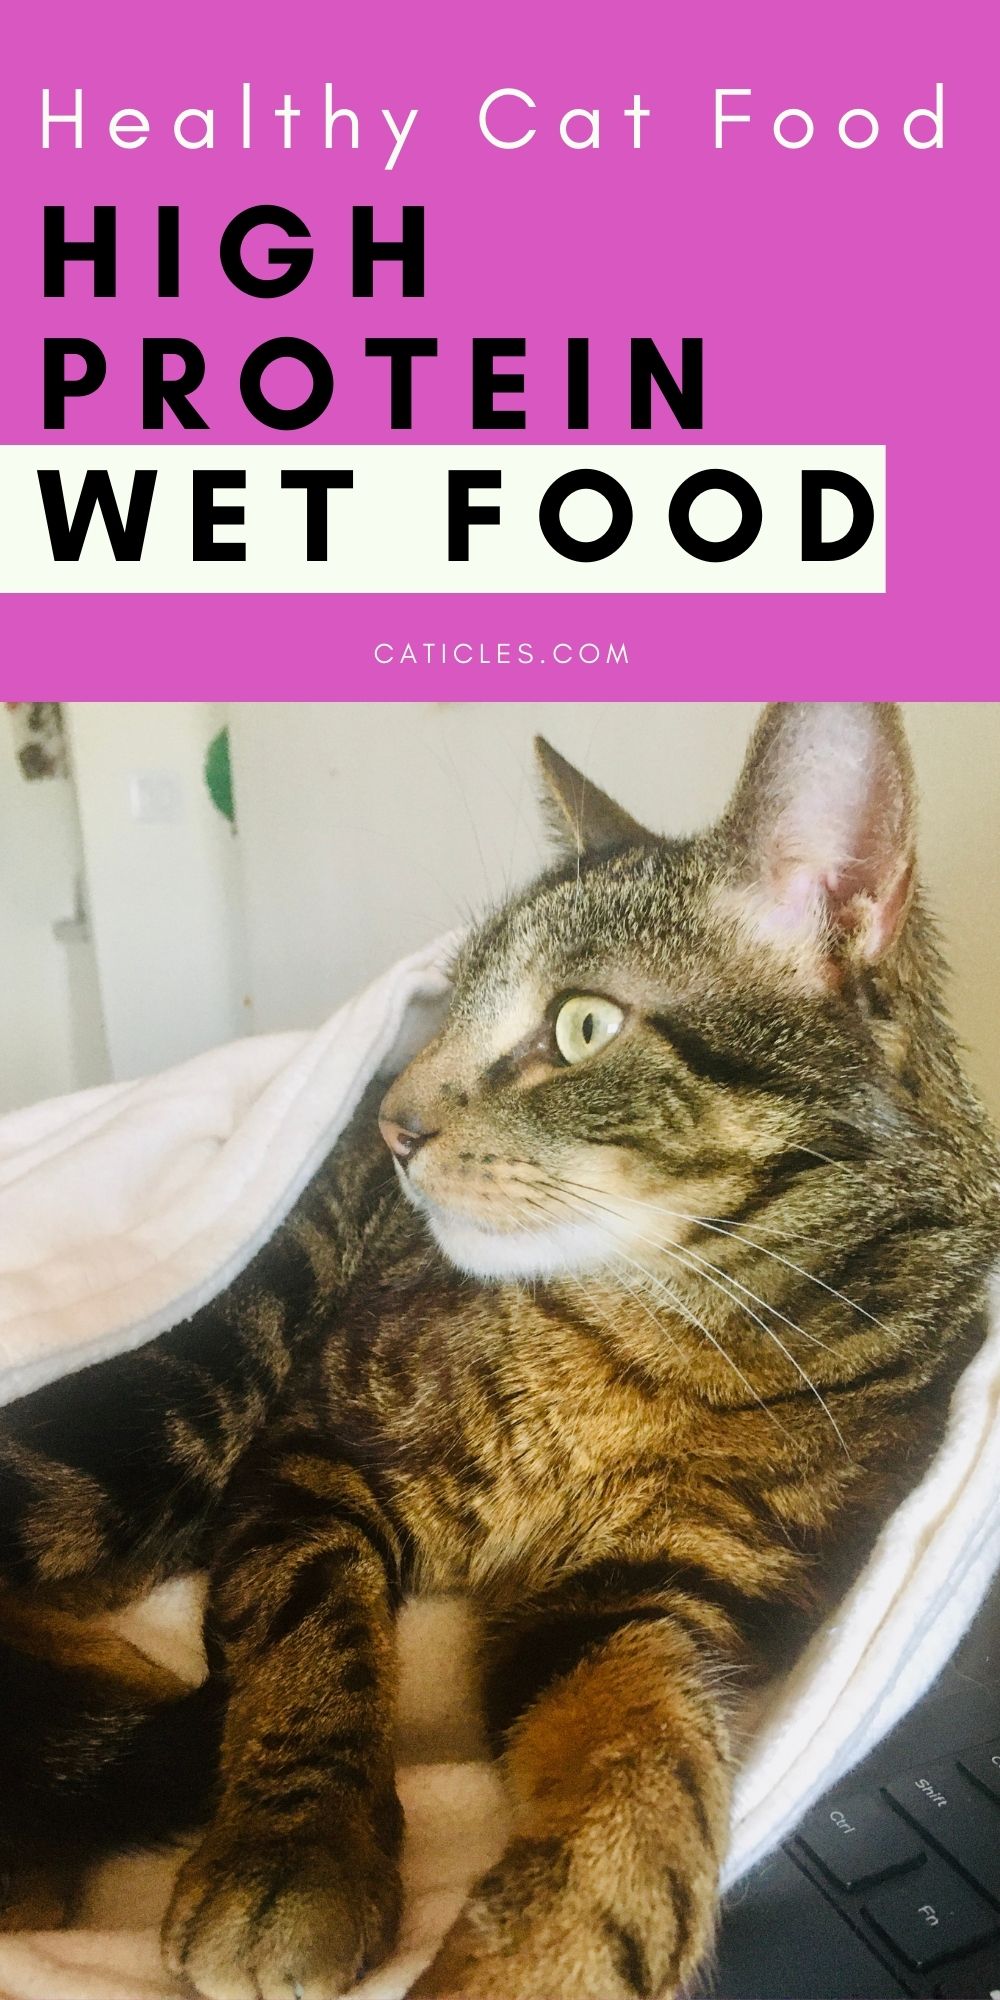 High Protein Low Carb Wet Cat Food for Weight Loss CATICLES